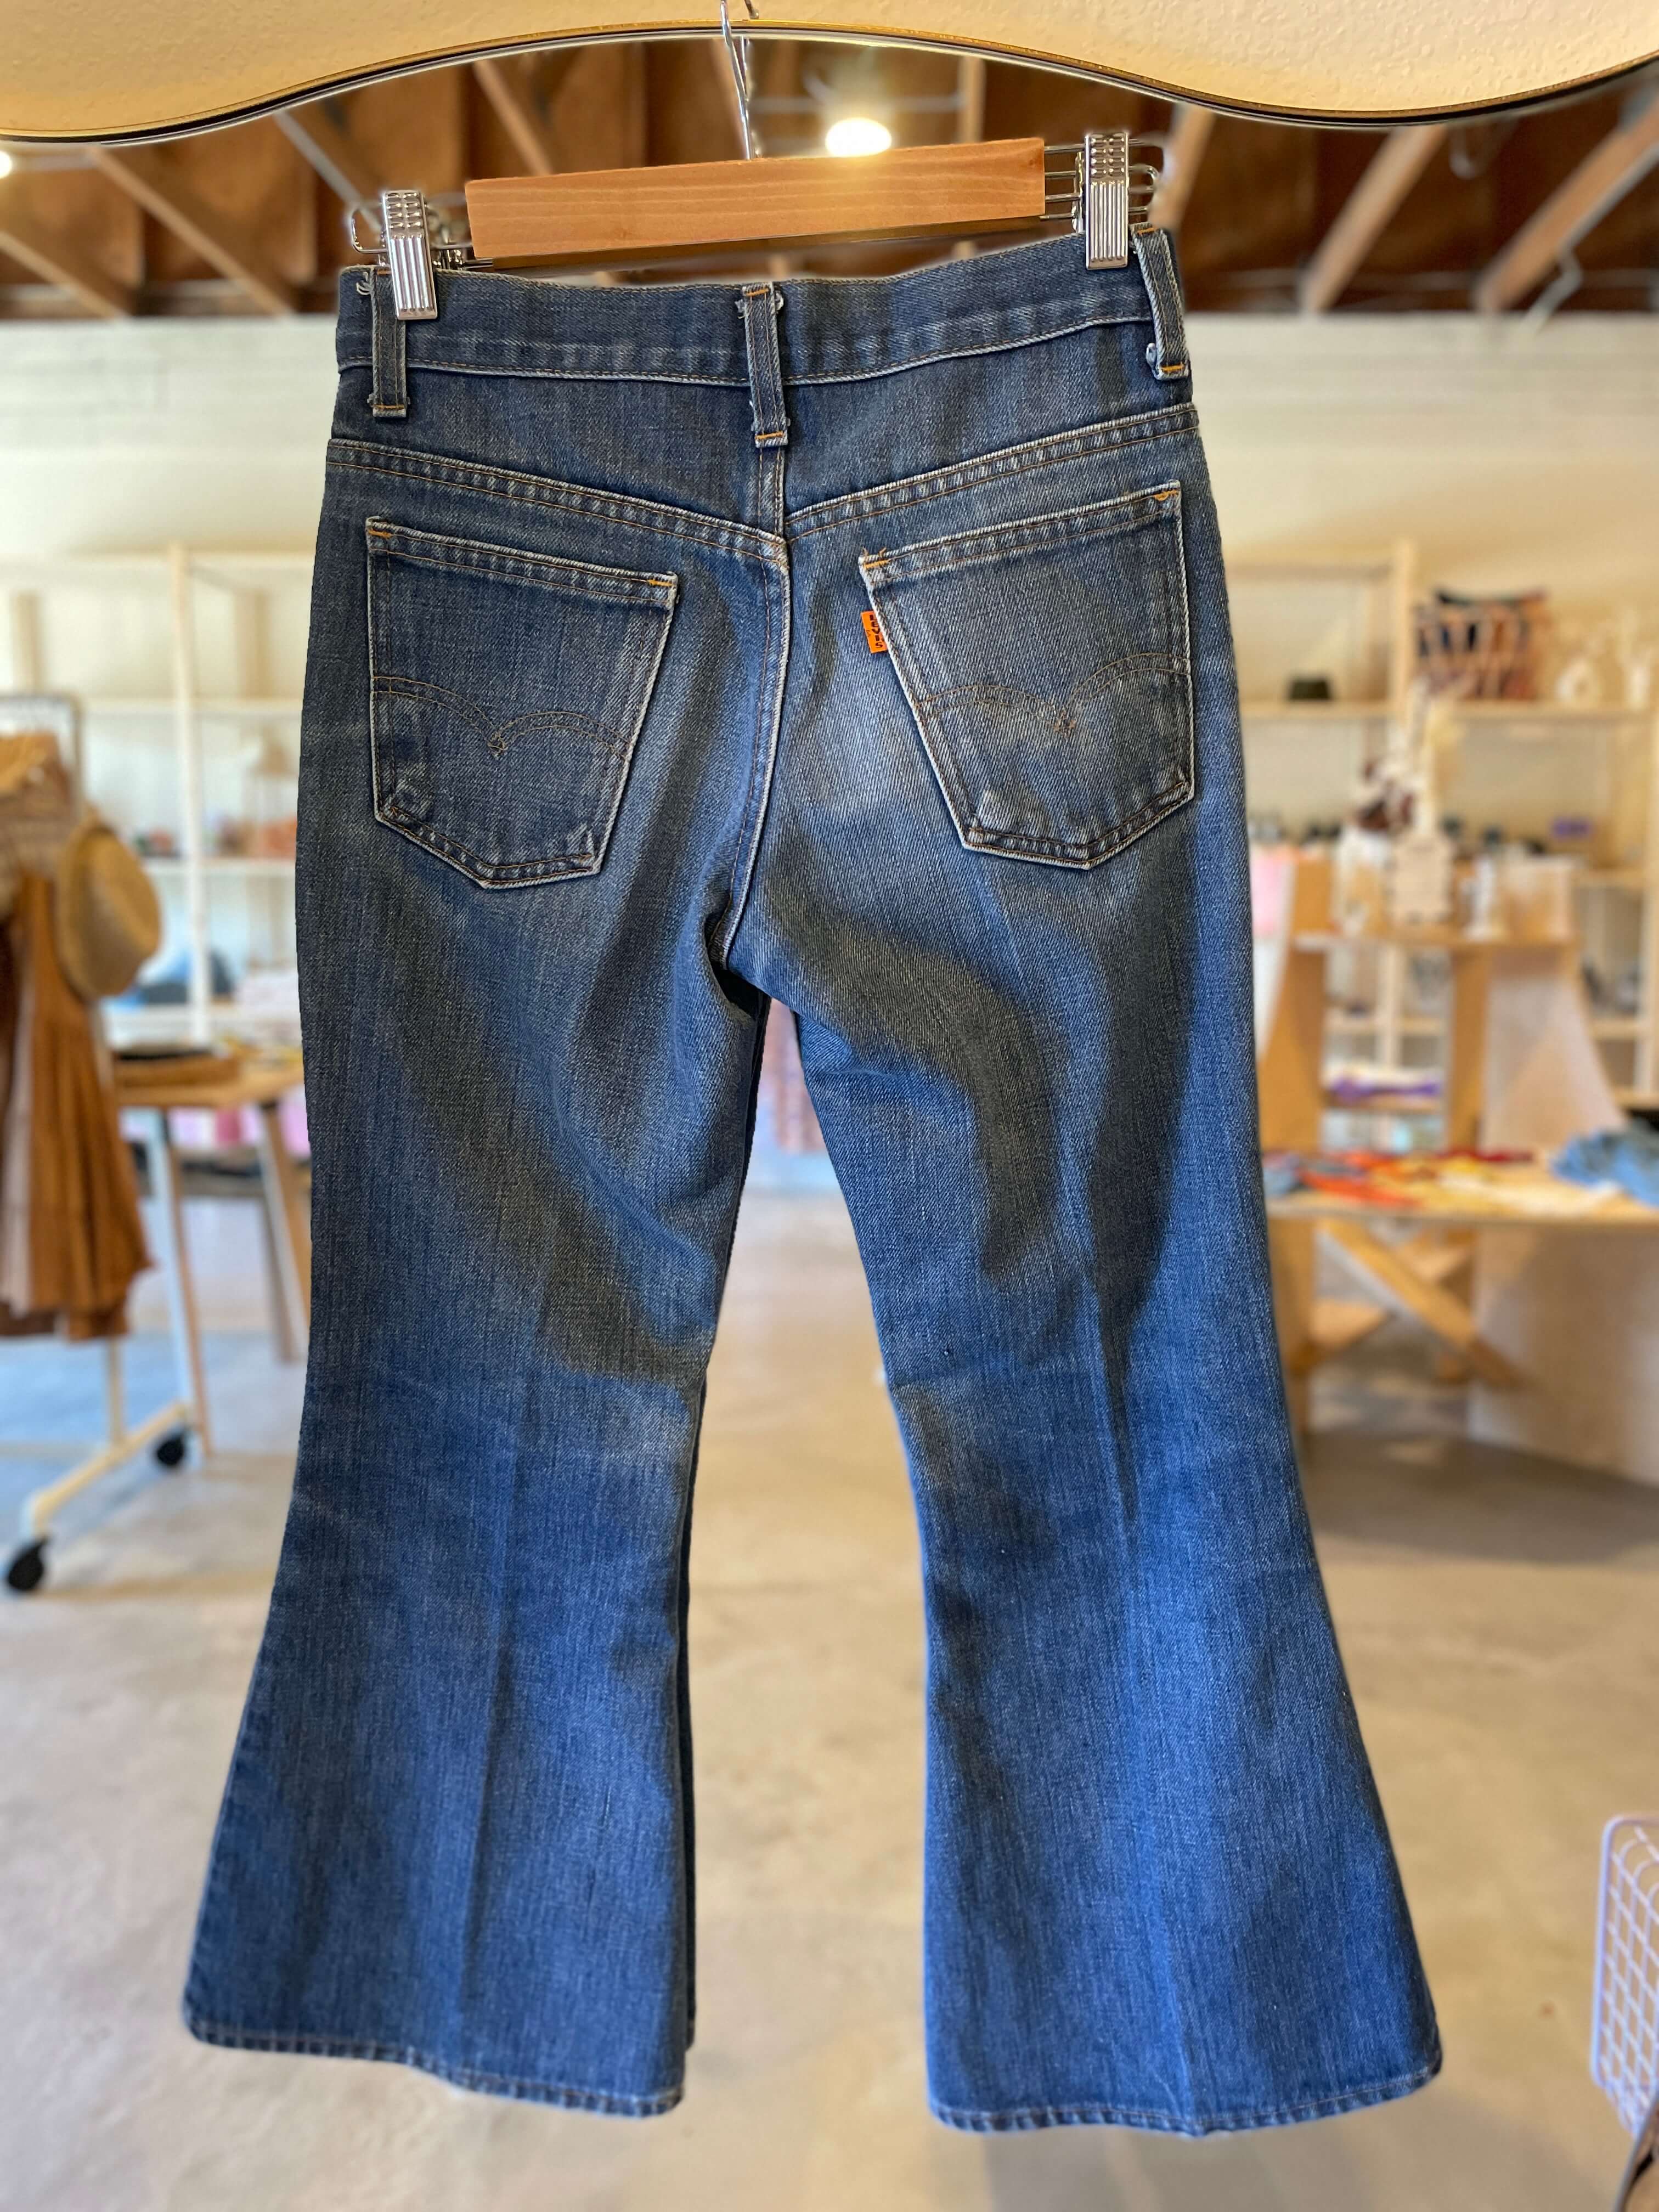 1970s Vintage Levi's 684 Big Bell Bottoms - Skies For Miles